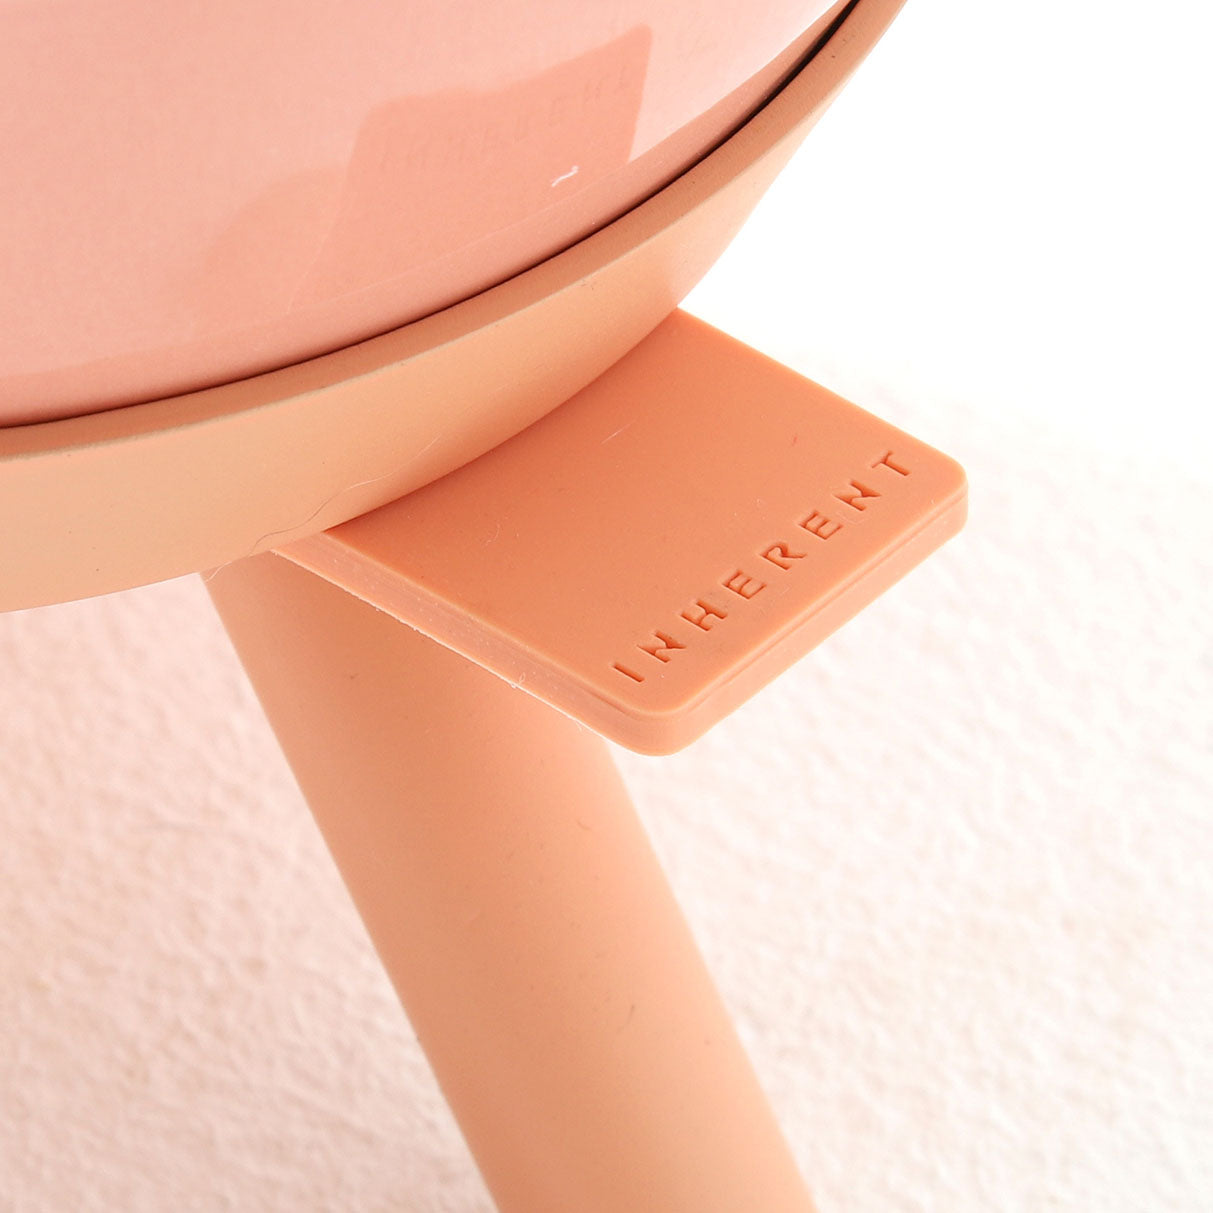 INHERENT Oreo Table in Pink- Side Details| CreatureLand.